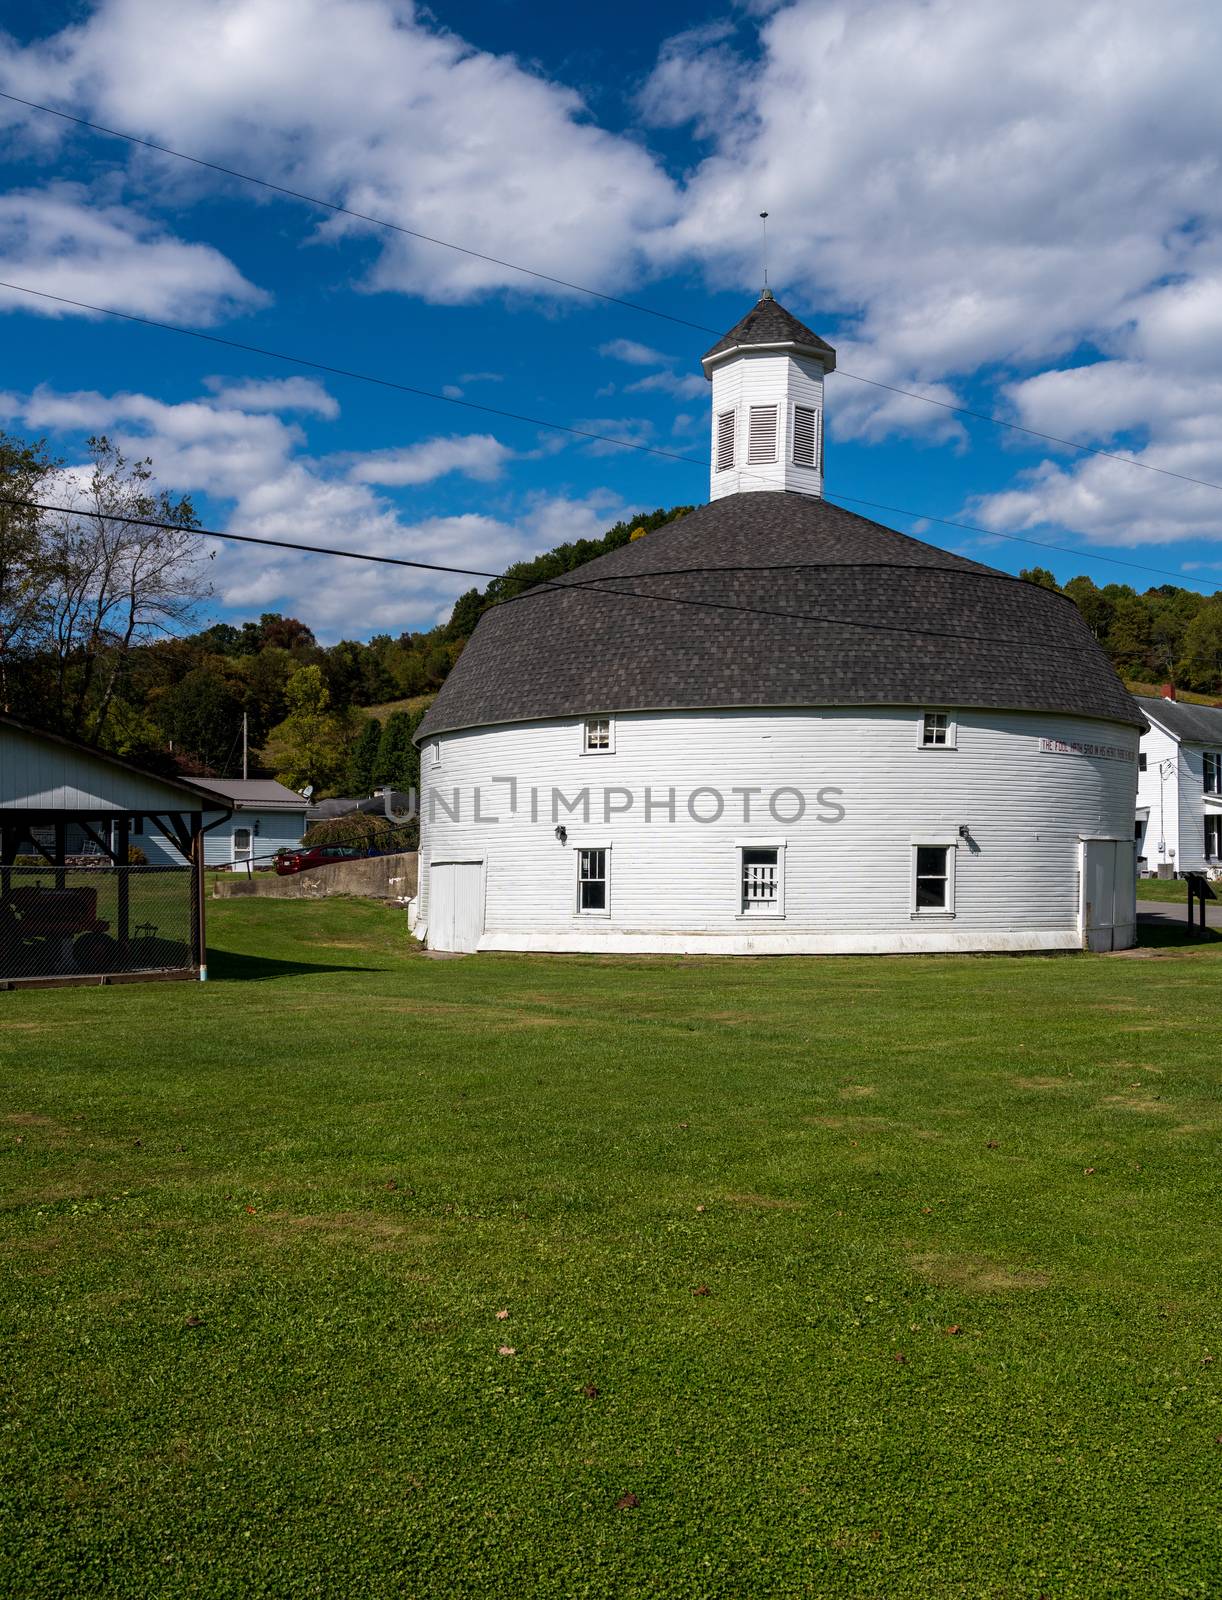 Hamilton round barn and museum in Mannington West Virginia by steheap